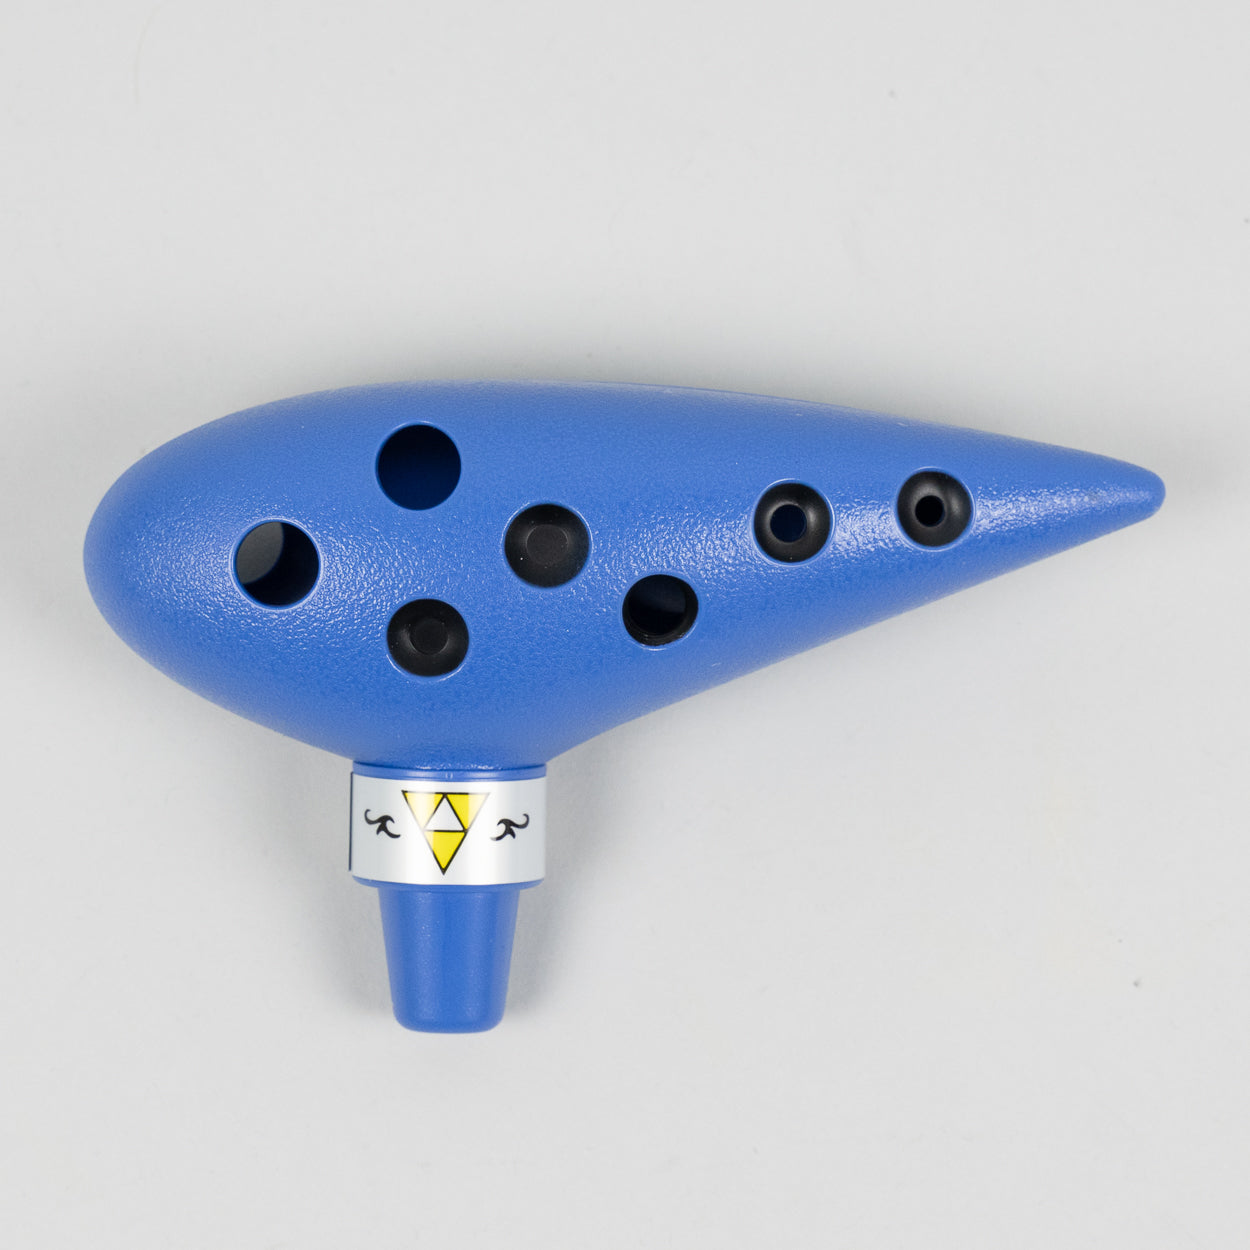 Songbird Ocarina of Time Replica - Ocarina Musical Instrument with Tutorial  and Songs - Tuned in C with Crystal Clear High Notes